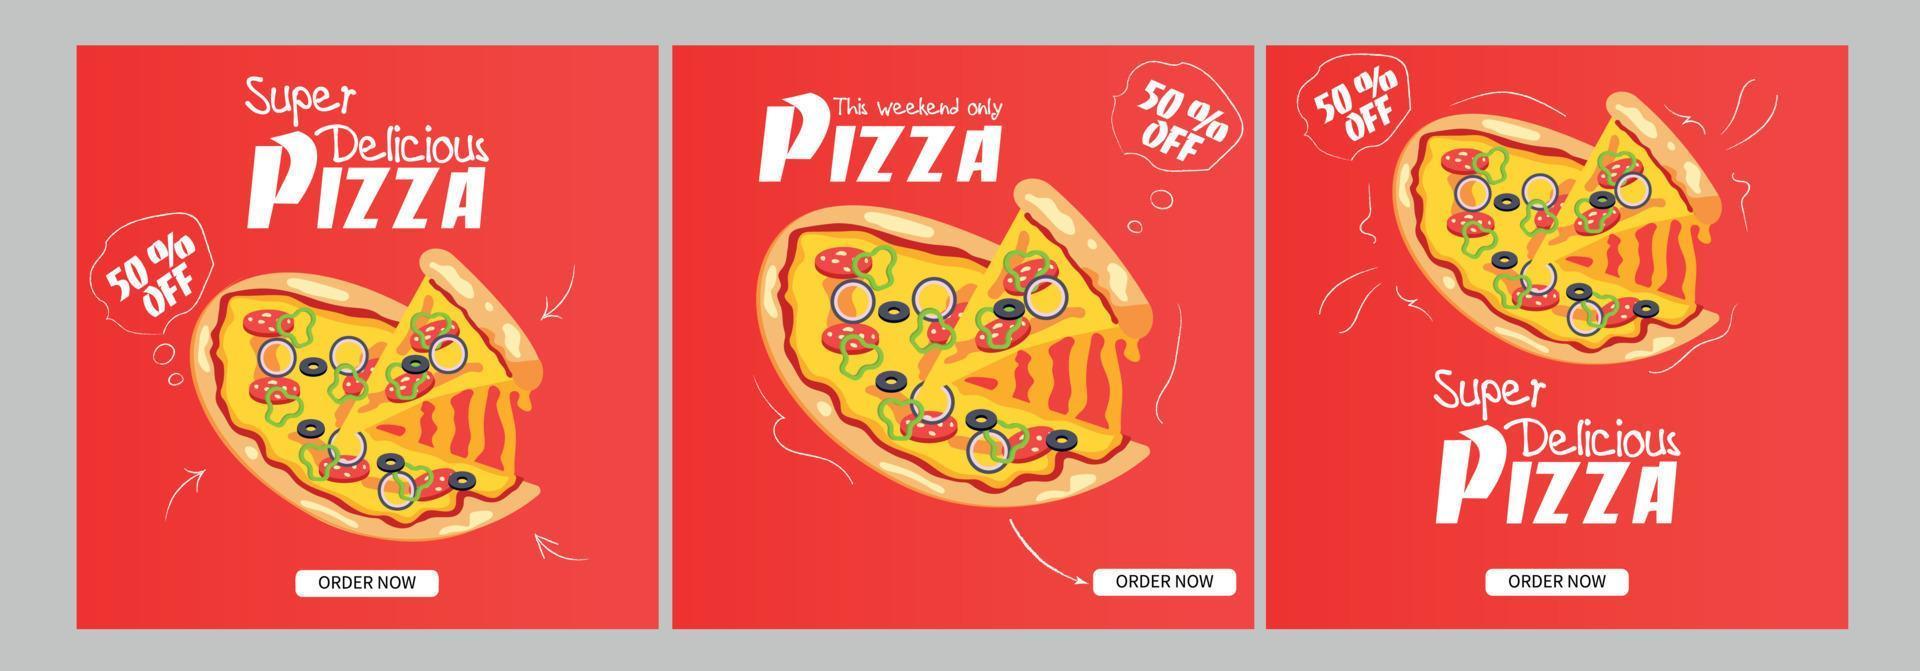 Pizza post and web banner template design. Set of web banner, flyer or poster with red accent for Pizza offer promotion vector